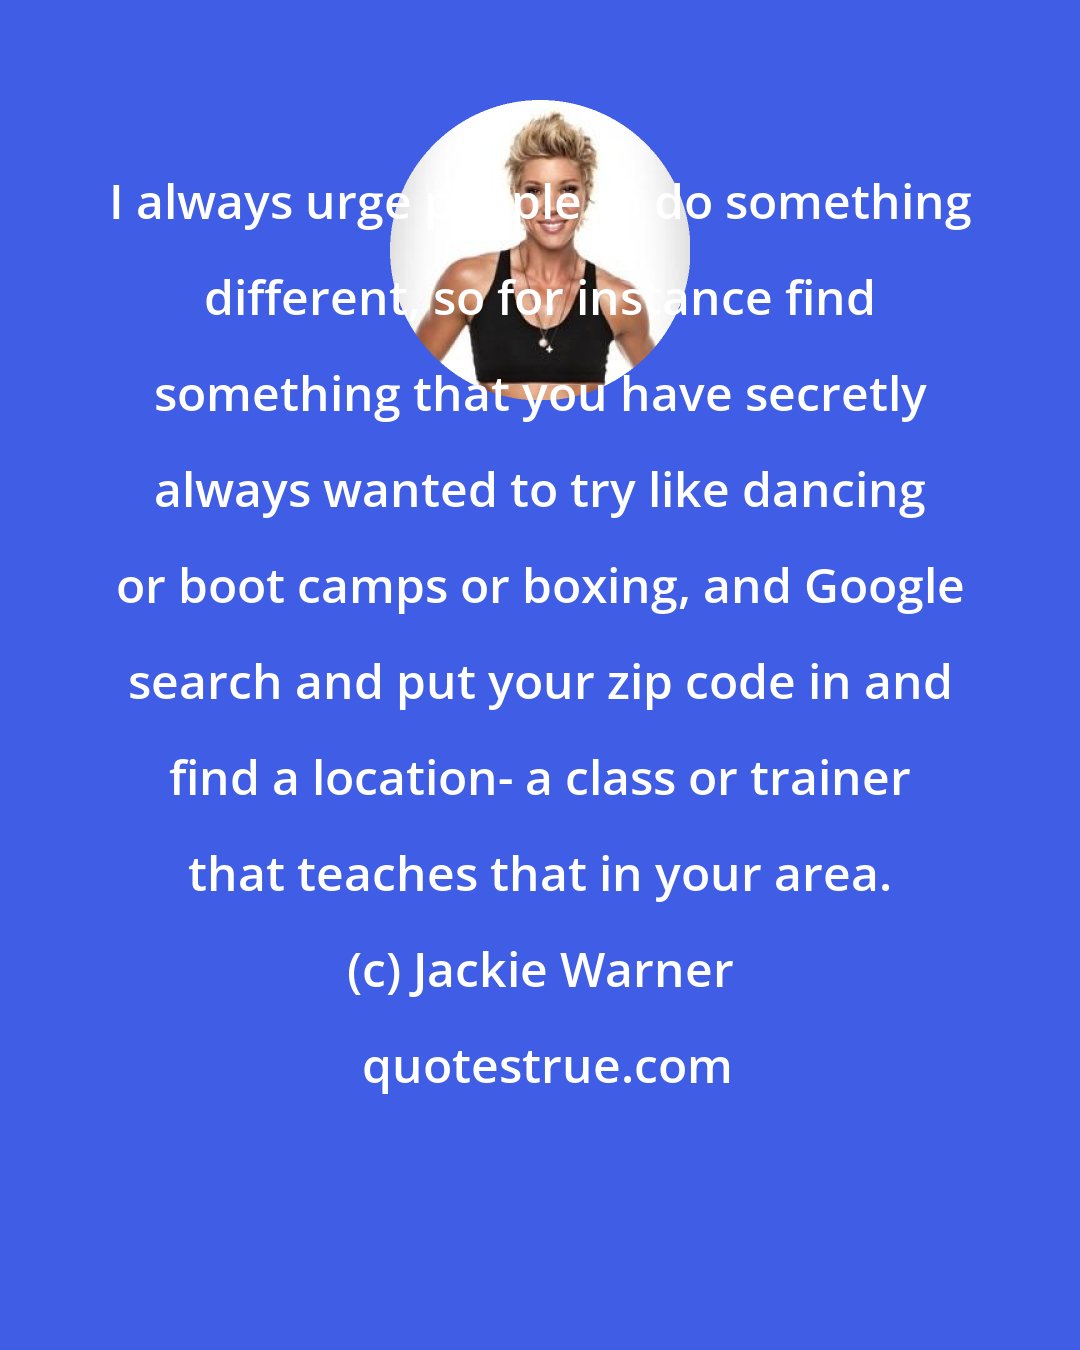 Jackie Warner: I always urge people to do something different, so for instance find something that you have secretly always wanted to try like dancing or boot camps or boxing, and Google search and put your zip code in and find a location- a class or trainer that teaches that in your area.